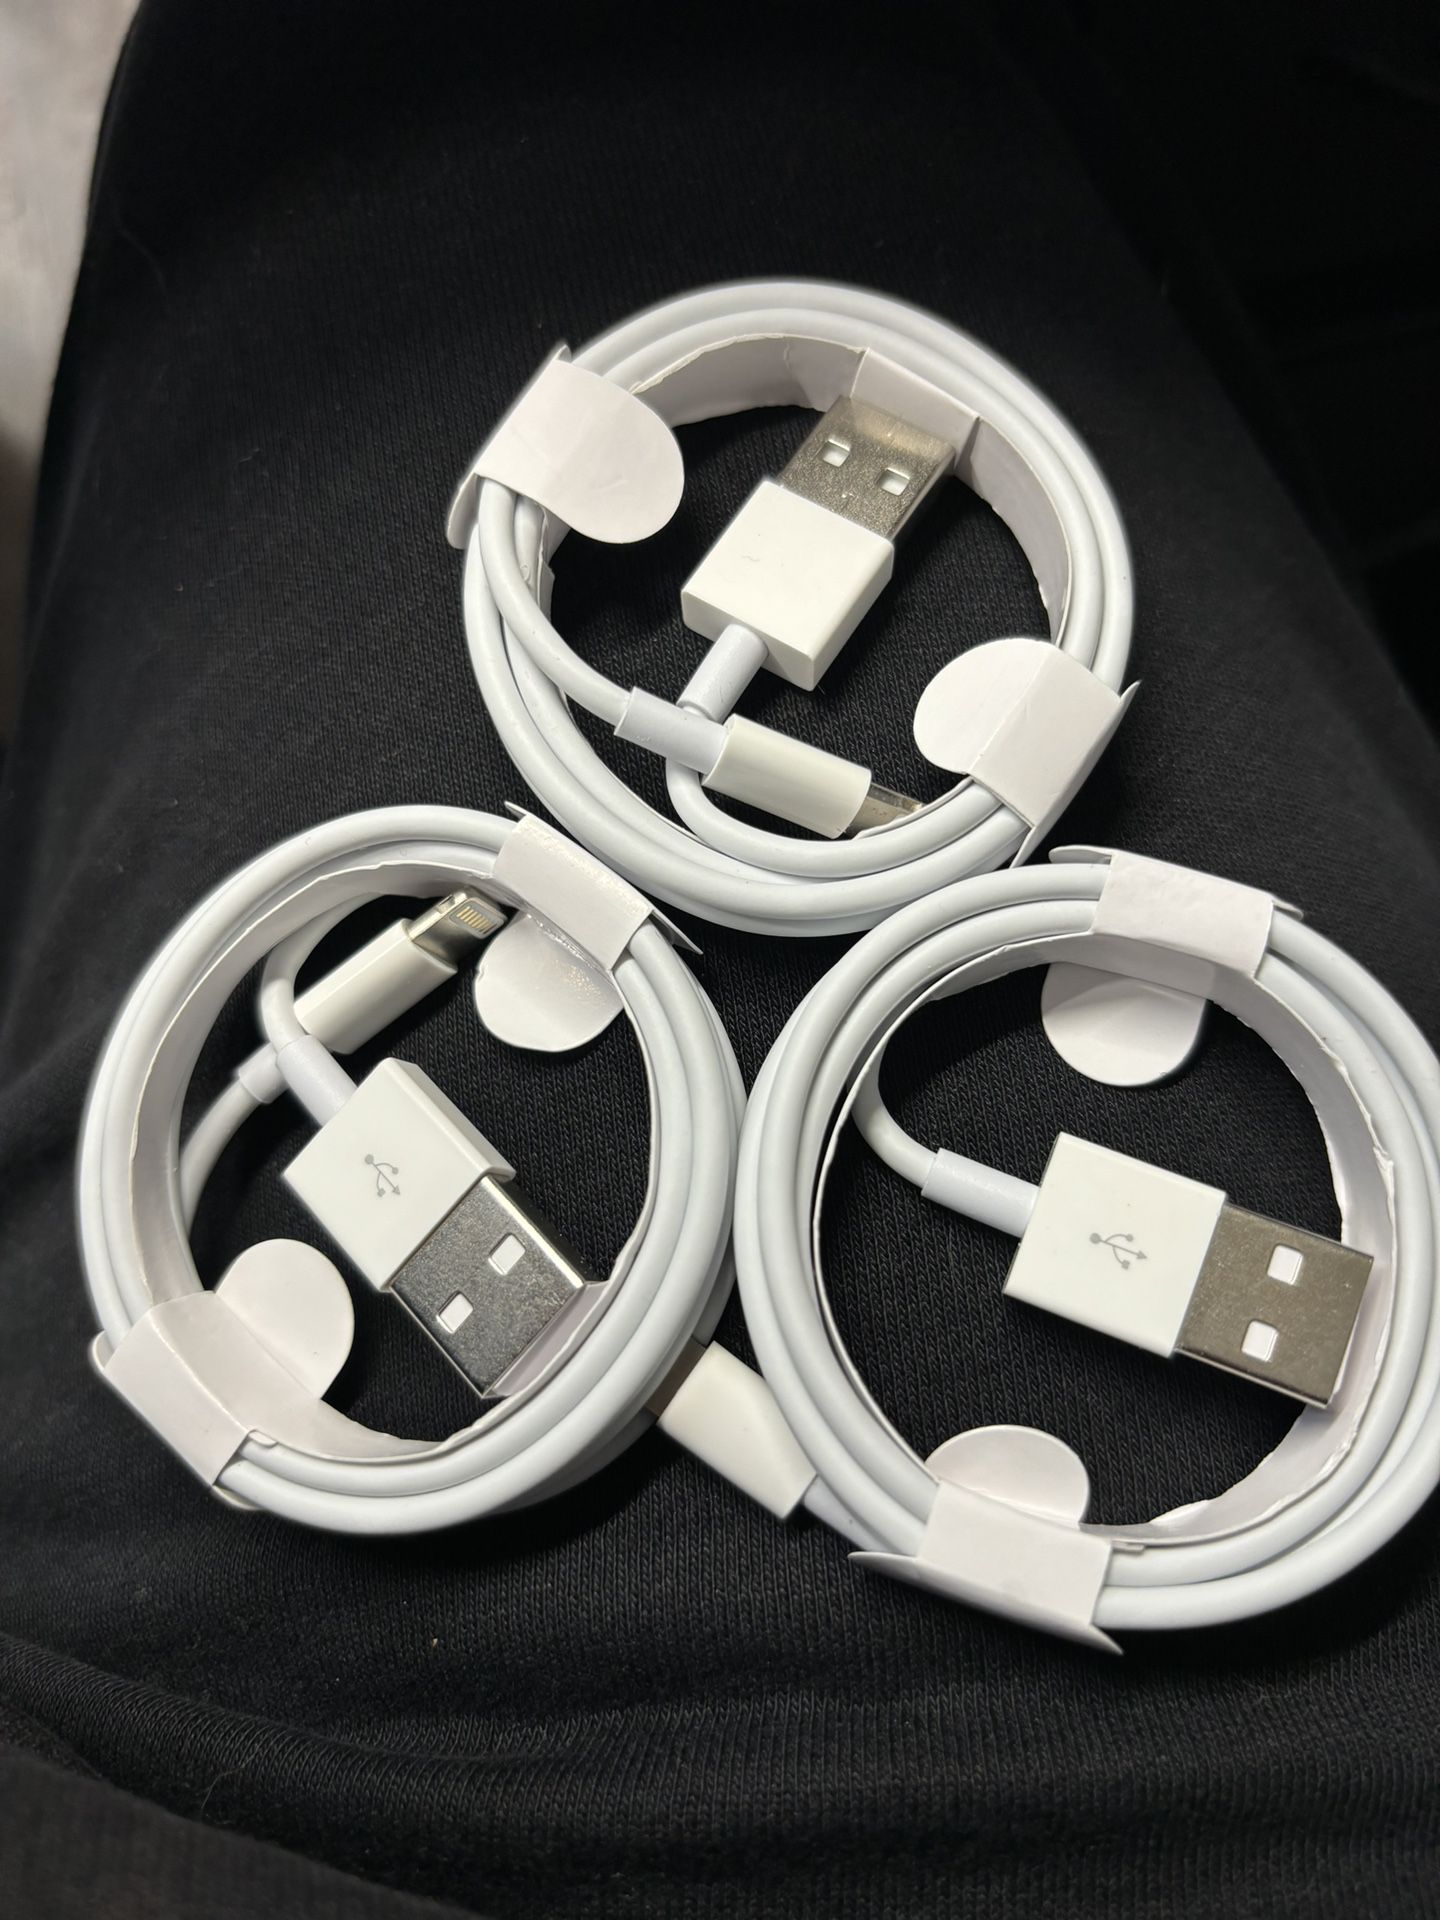 Brand New iPhone Chargers 